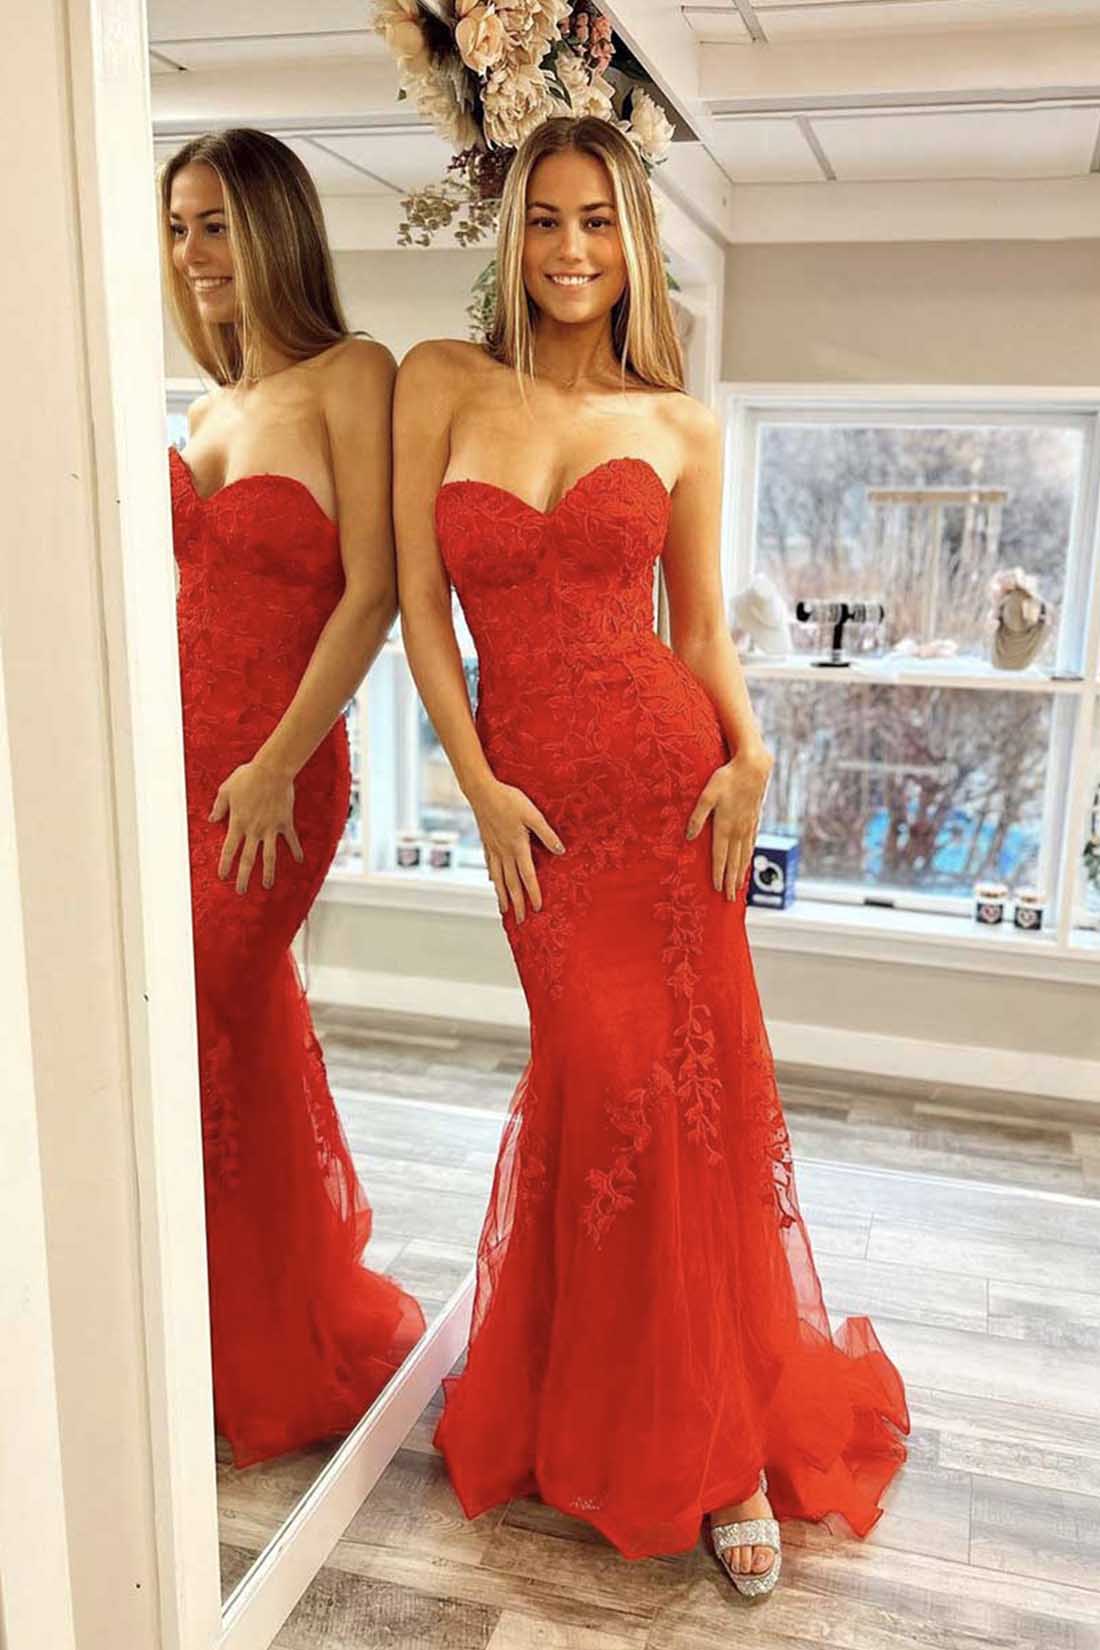 Mermaid Strapless Lace Long Prom Dress, Red Evening Party Dress